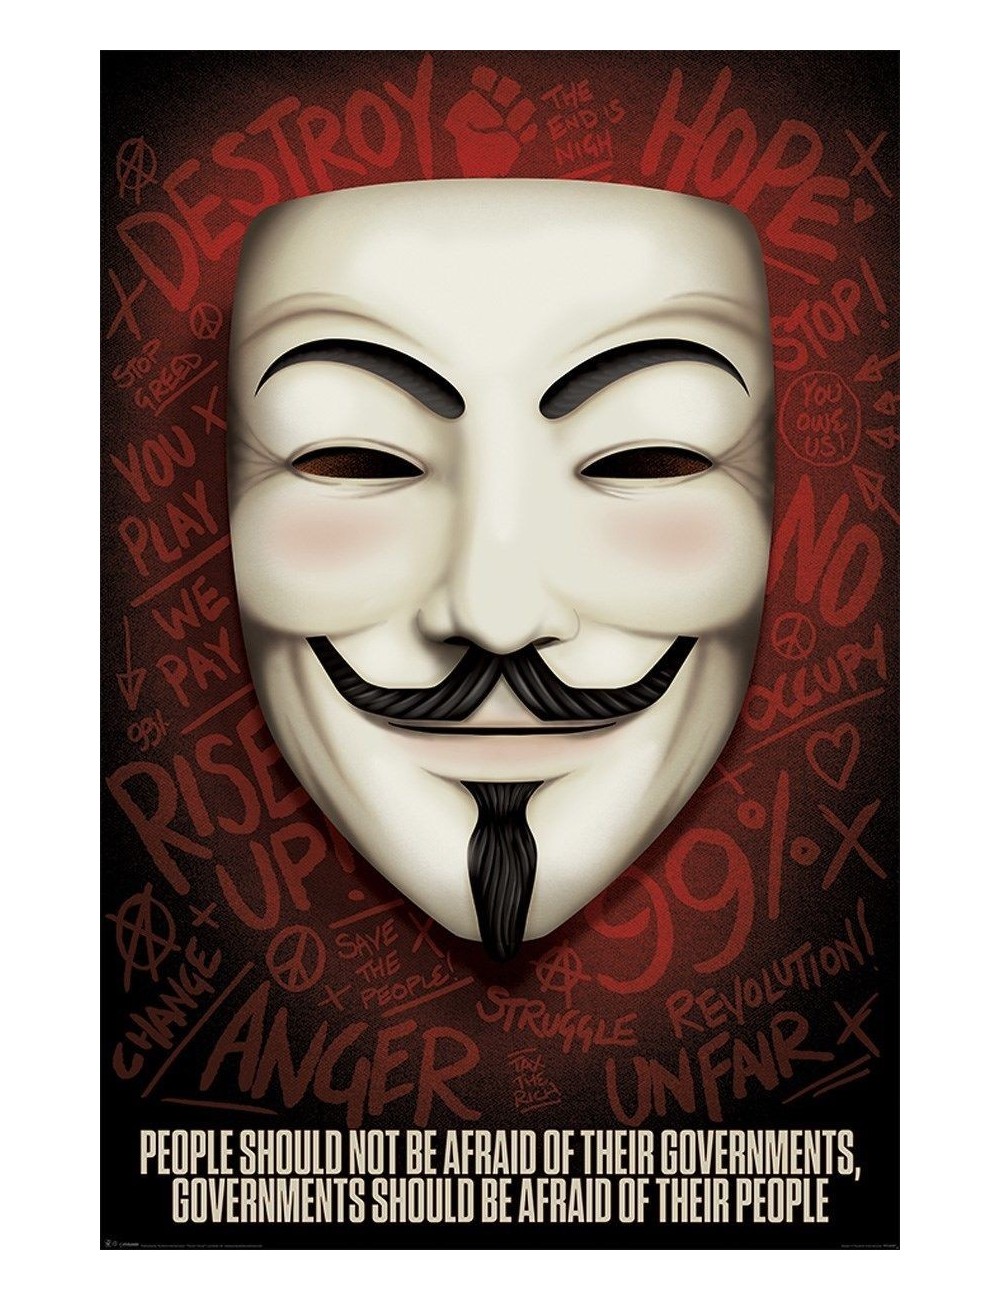 Poster V for Vendetta: Governments should be afraid of their people